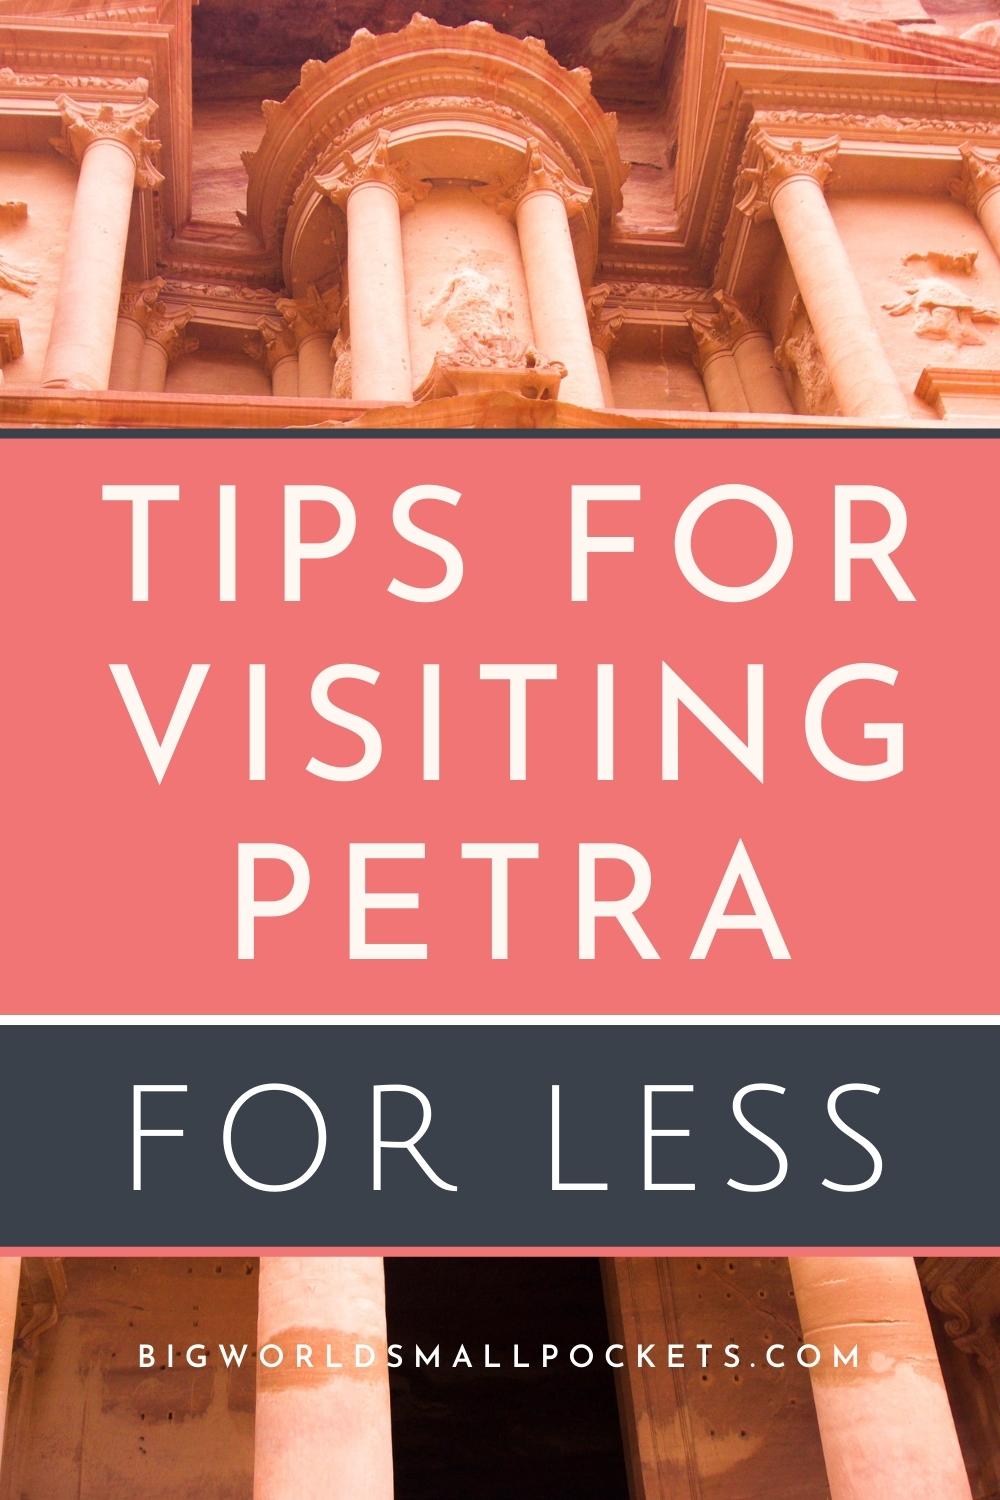 Tips for Visiting Petra for Less